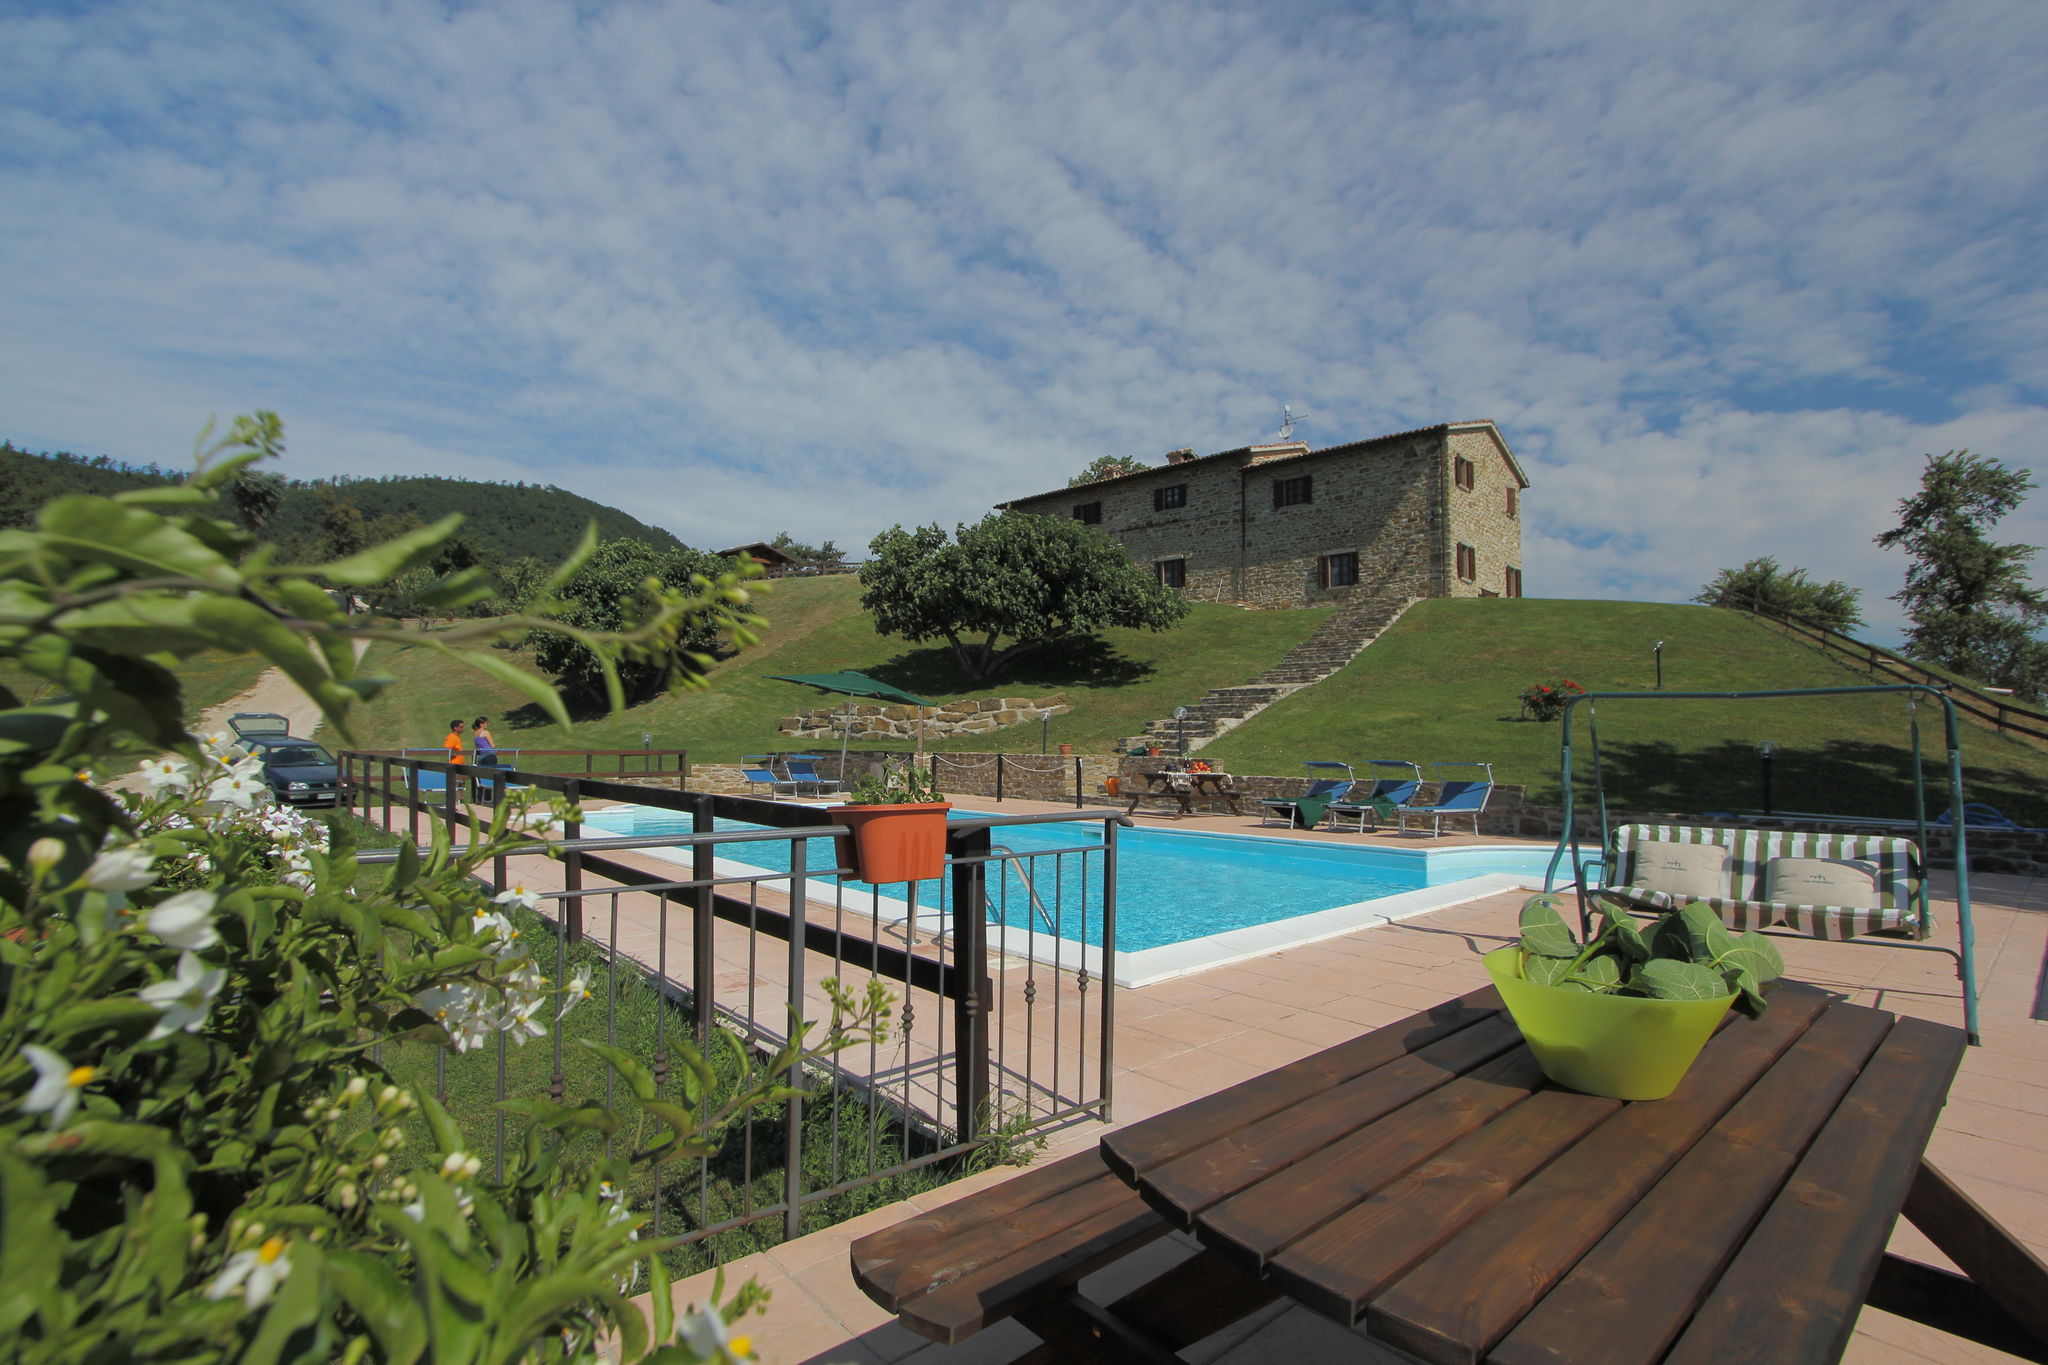 Valley-View Holiday Home in Apecchio with Pool